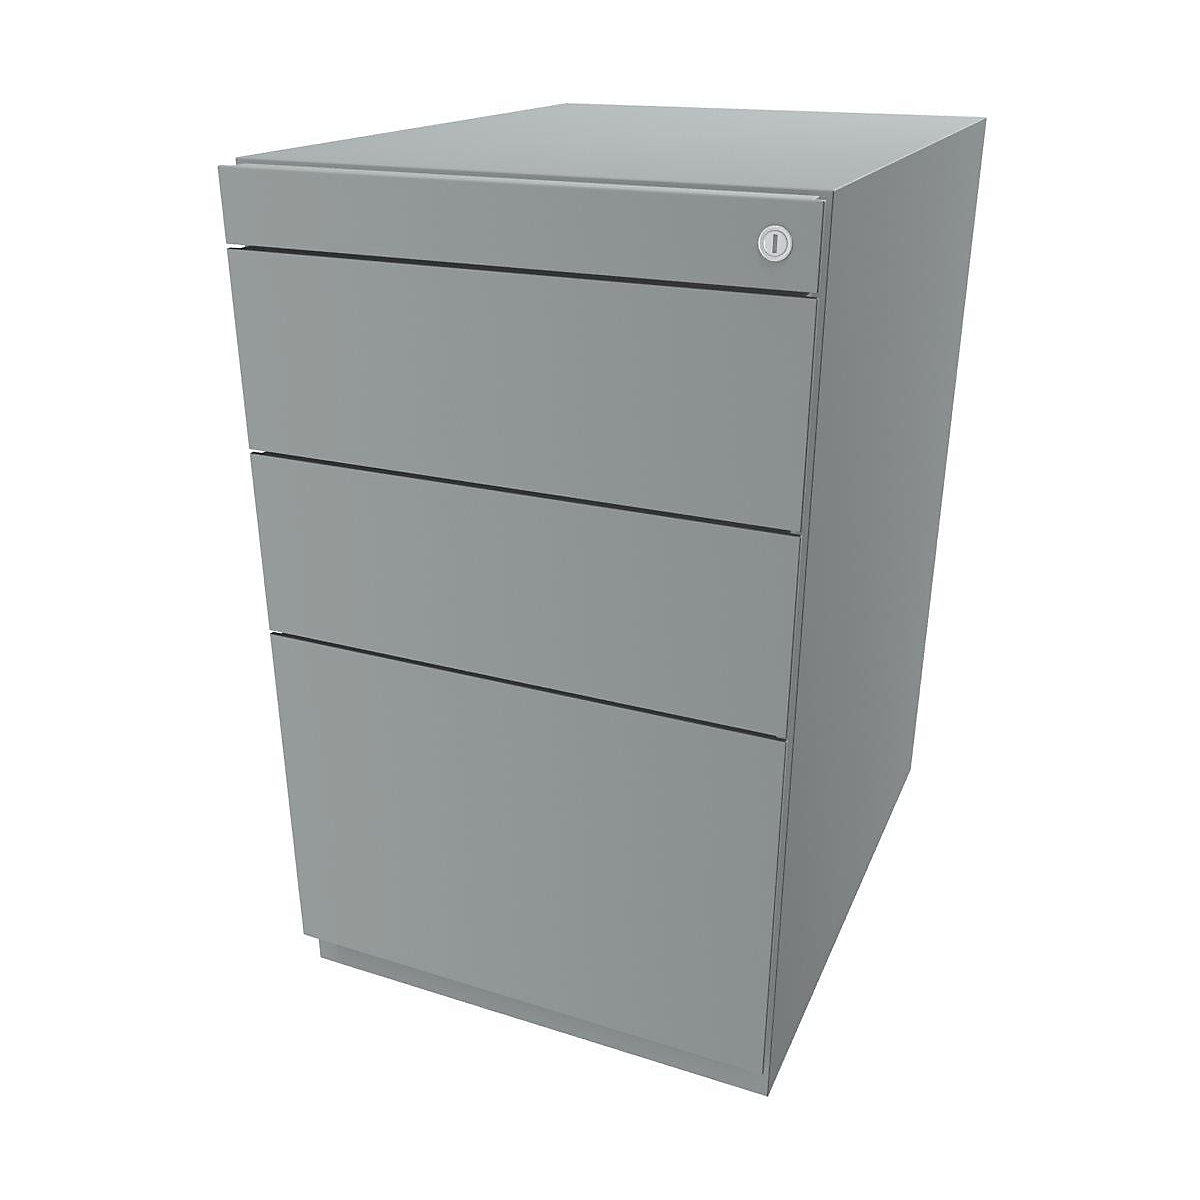 Note™ fixed pedestal, with 2 universal drawers, 1 suspension file drawer – BISLEY, without top, depth 565 mm, silver-13